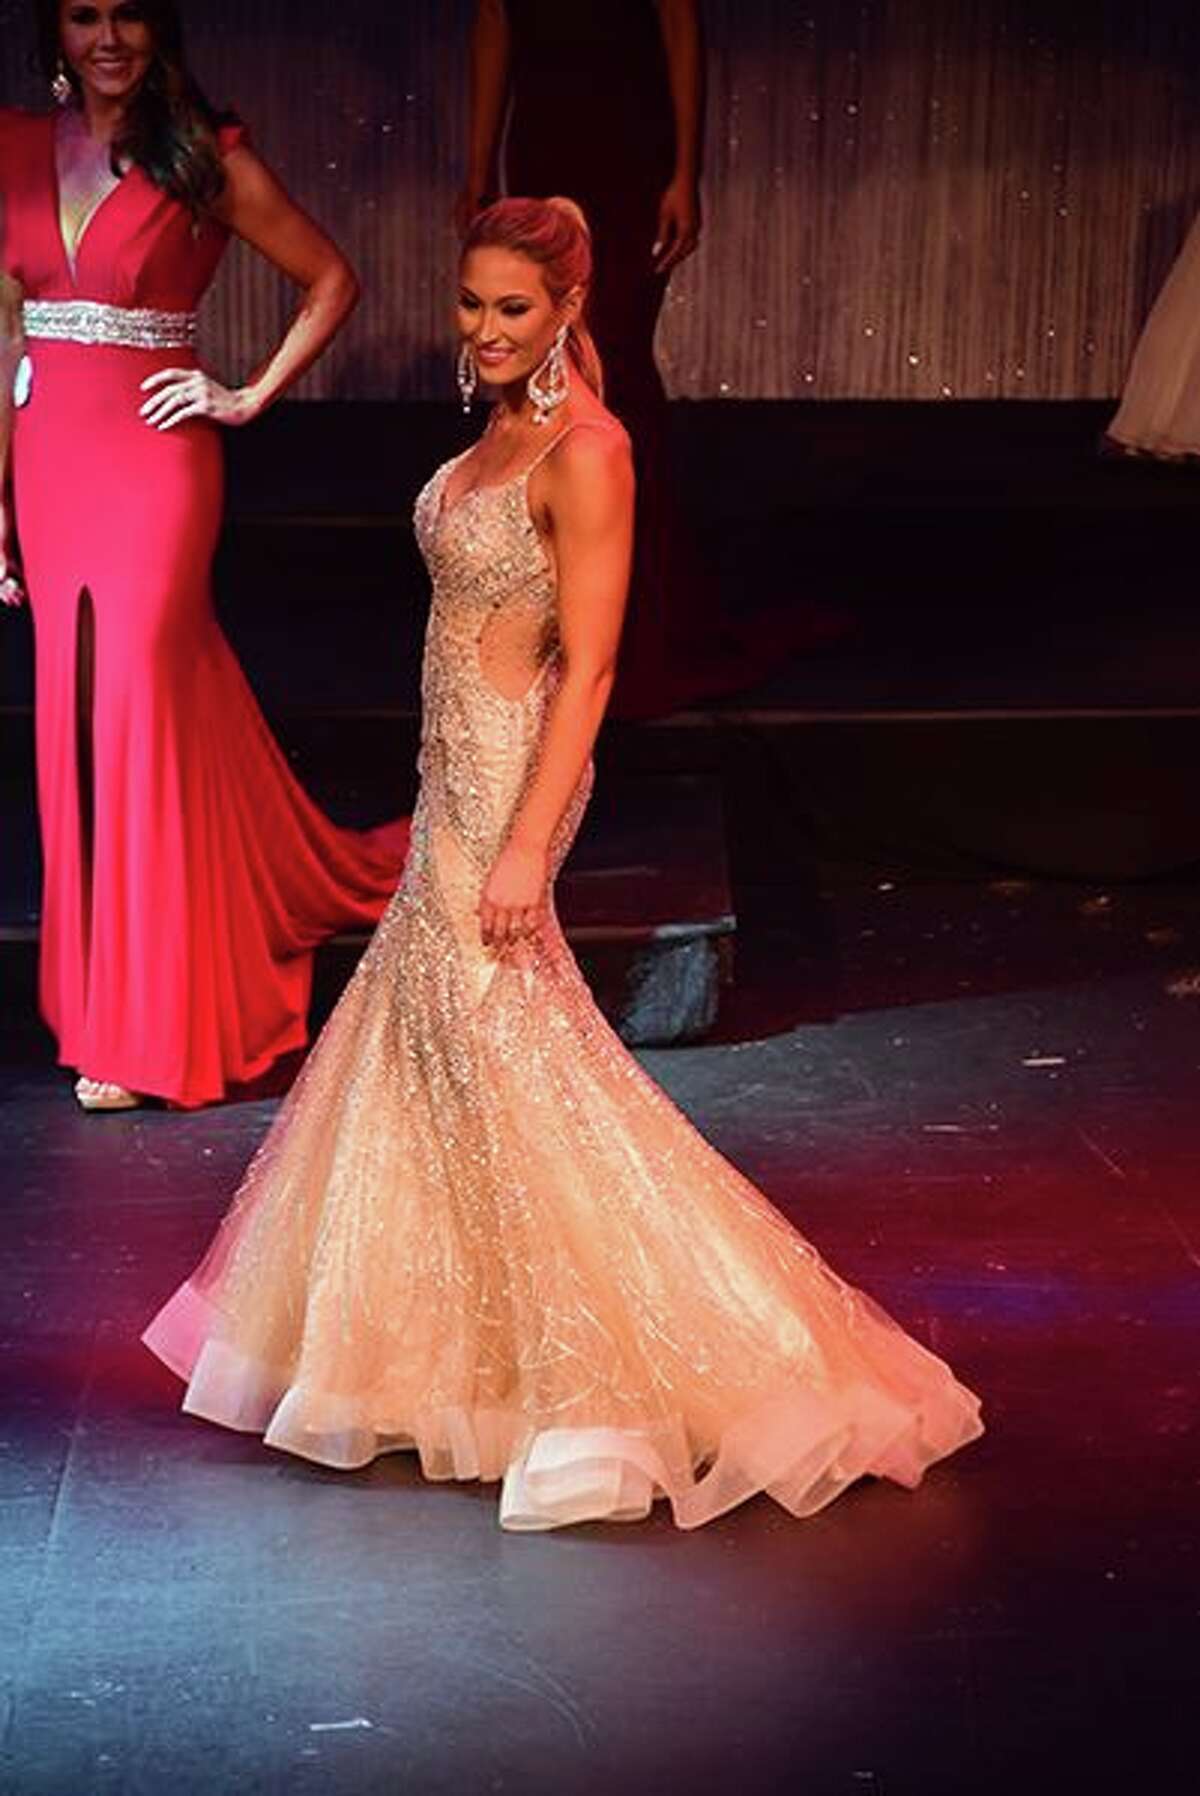 Woman survives rare stomach cancer, crowned Mrs. Texas